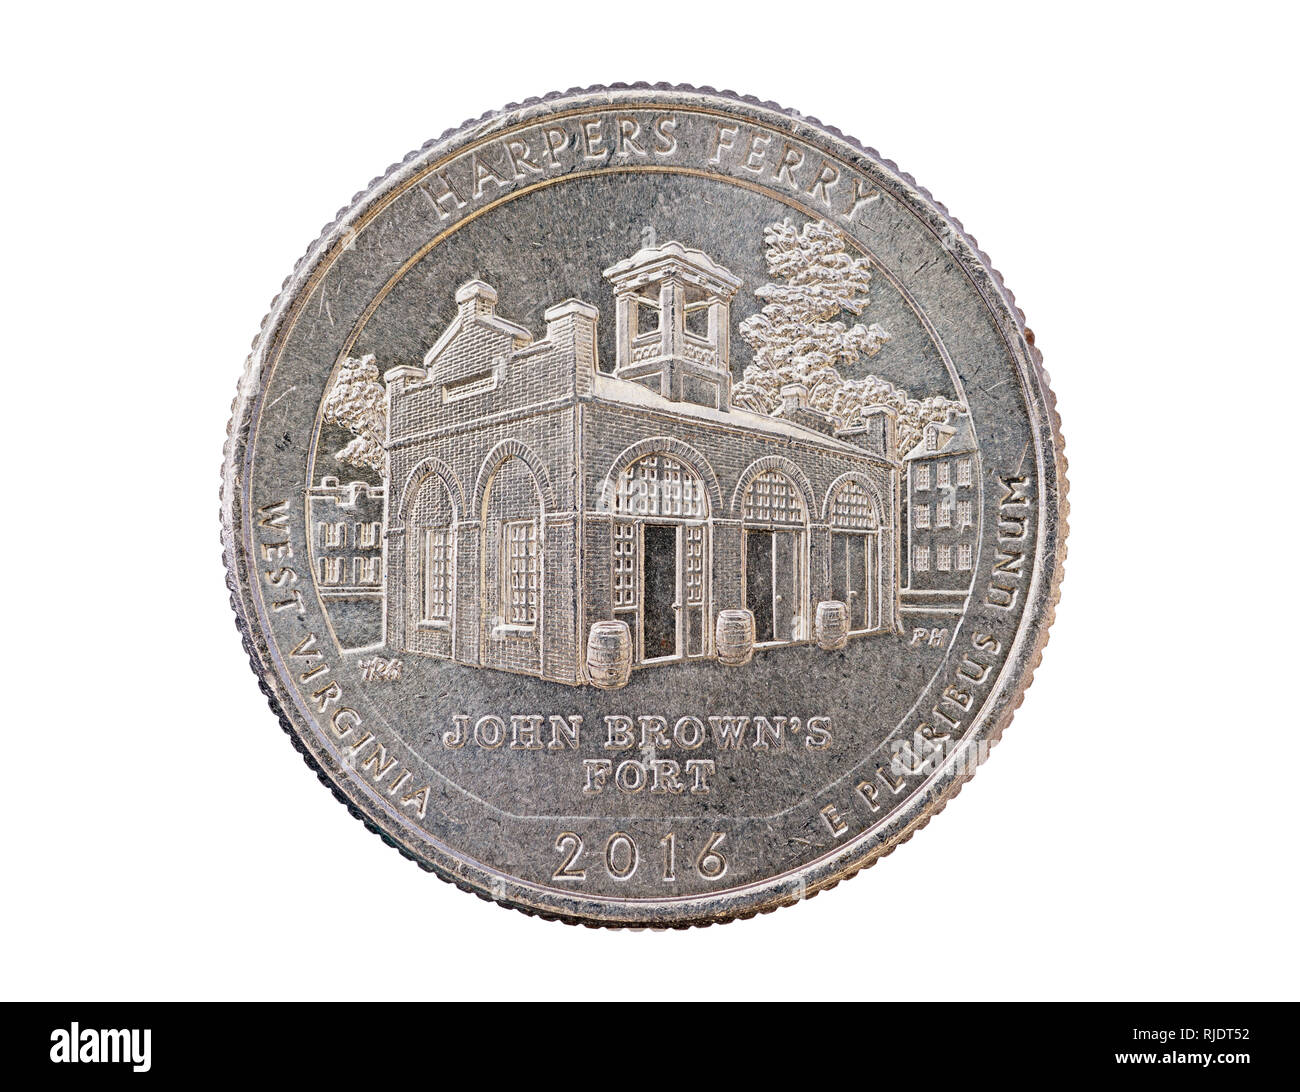 Harpers Ferry commemorative US quarter coin isolated on white Stock Photo